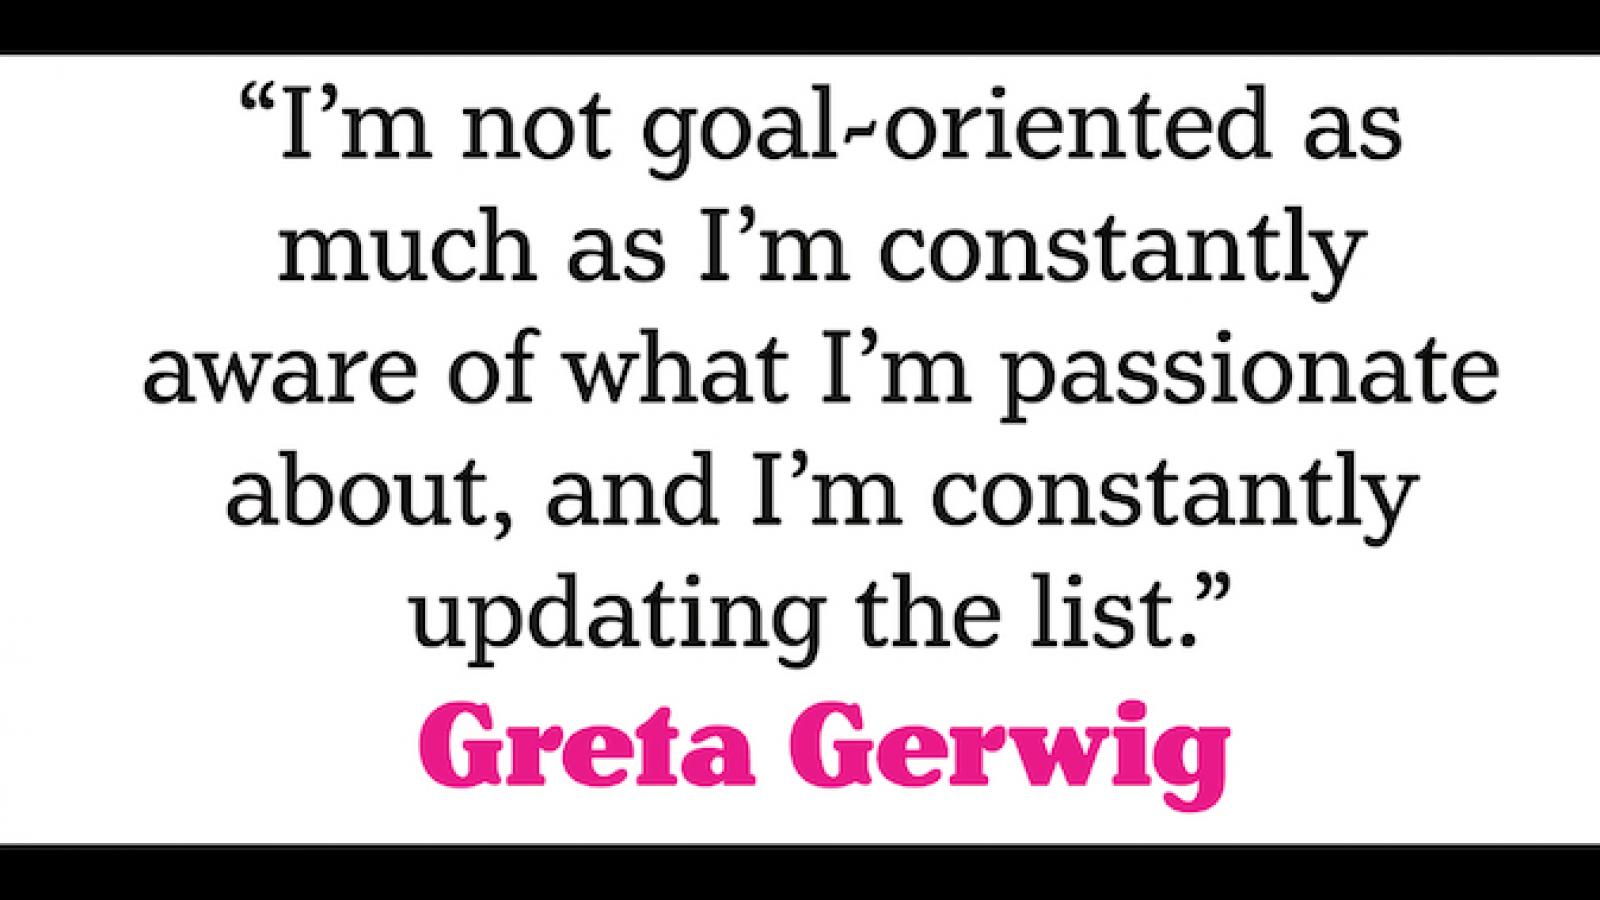 quote by Greta Gerwig